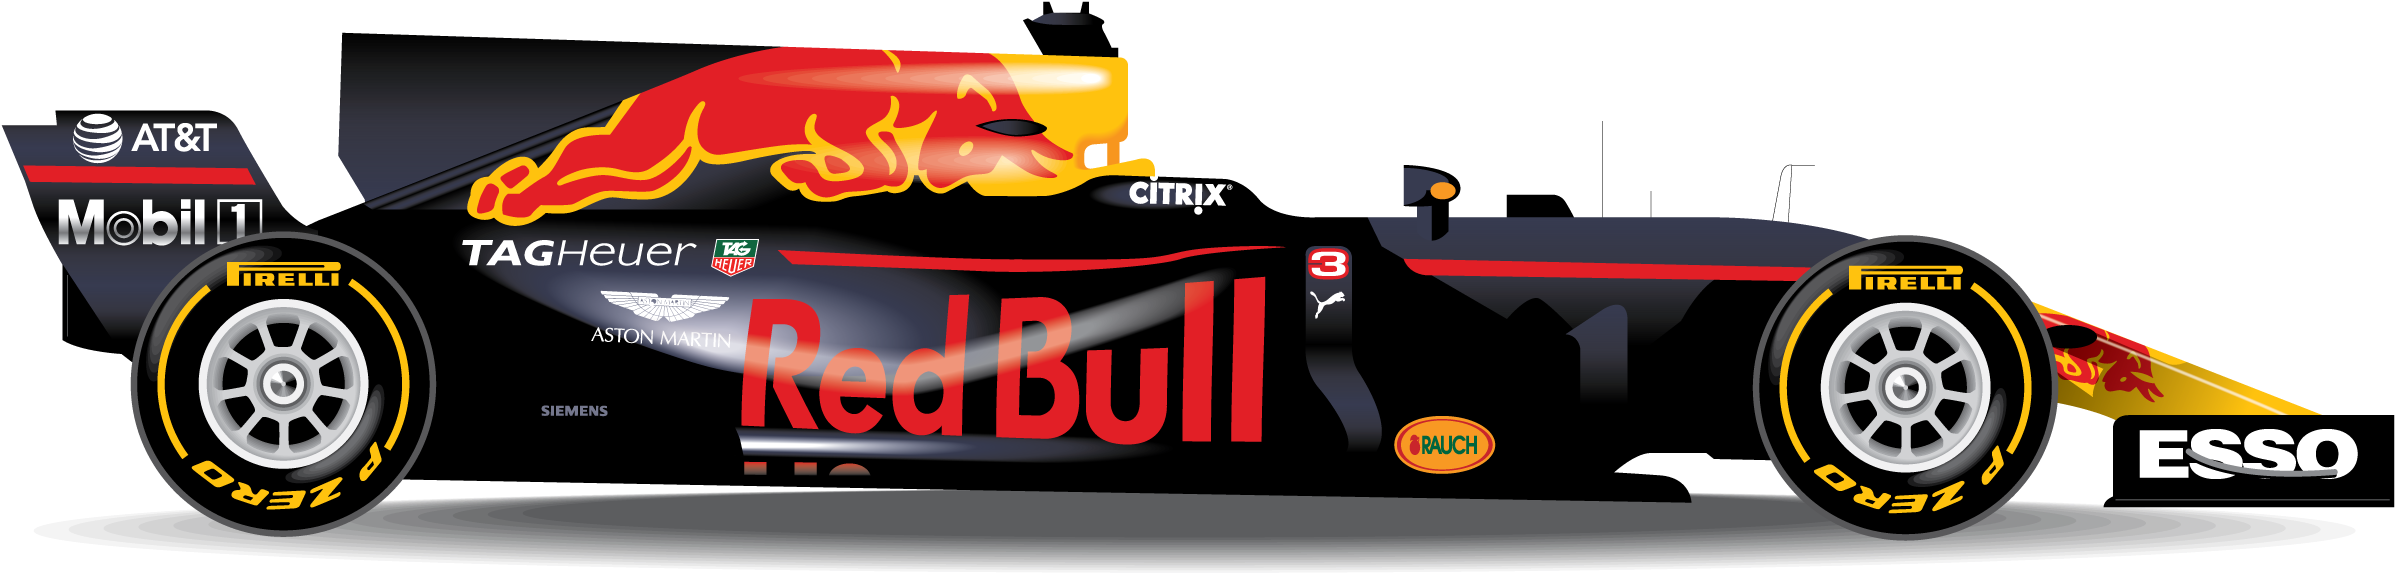 3rd Place - Red Bull F1 Png (2400x600)